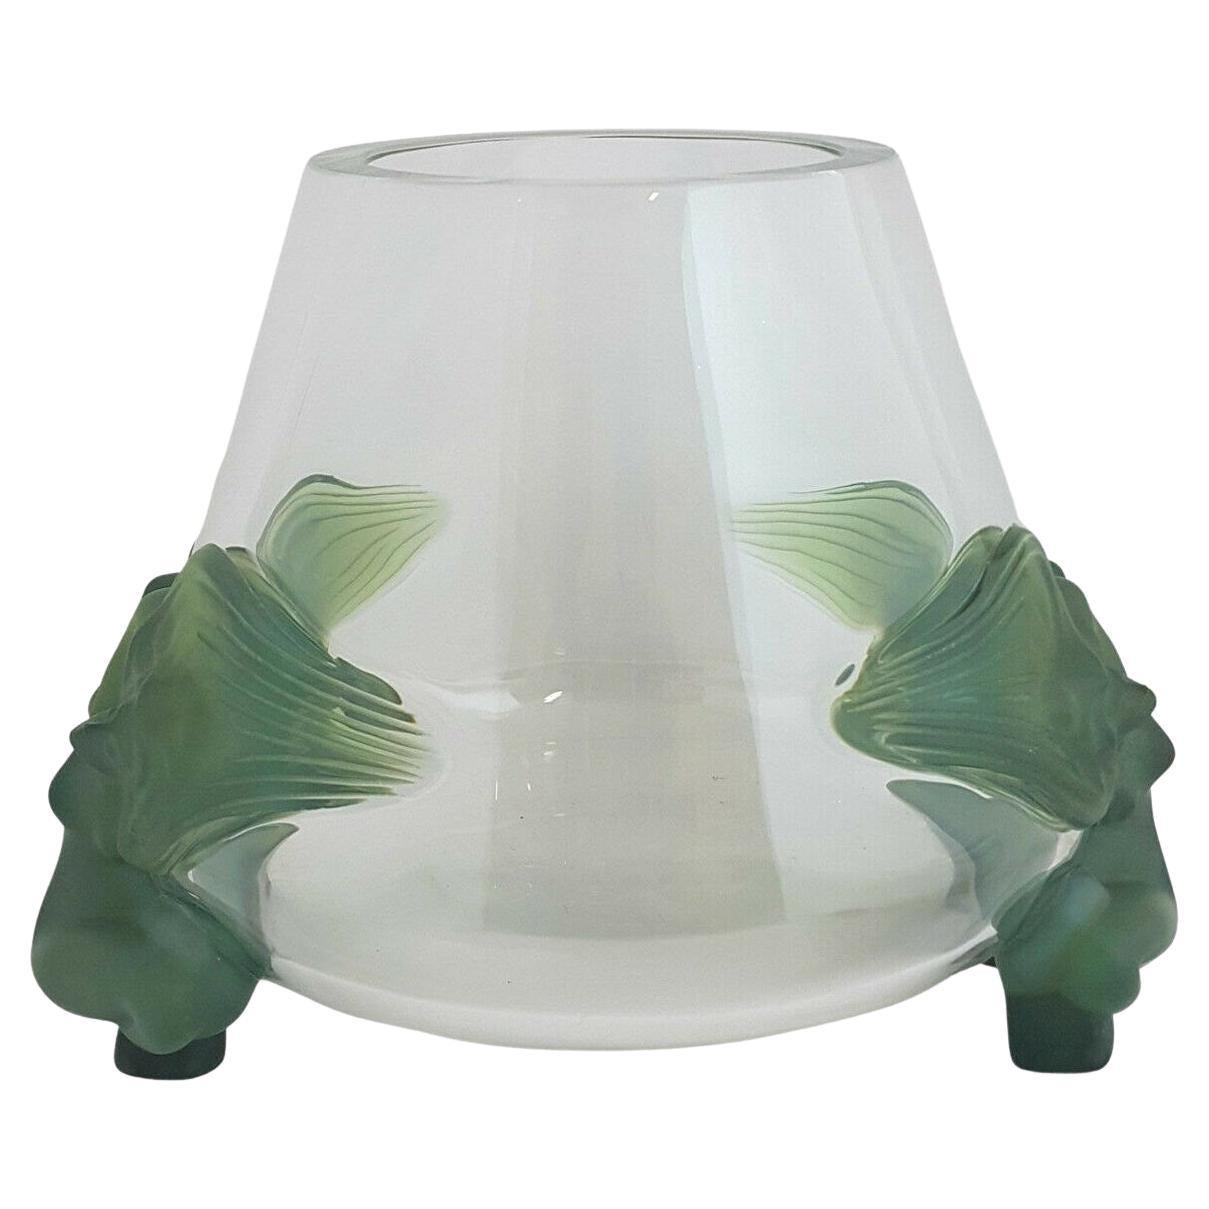 Antinea Pattern Lalique Crystal Glass Vase